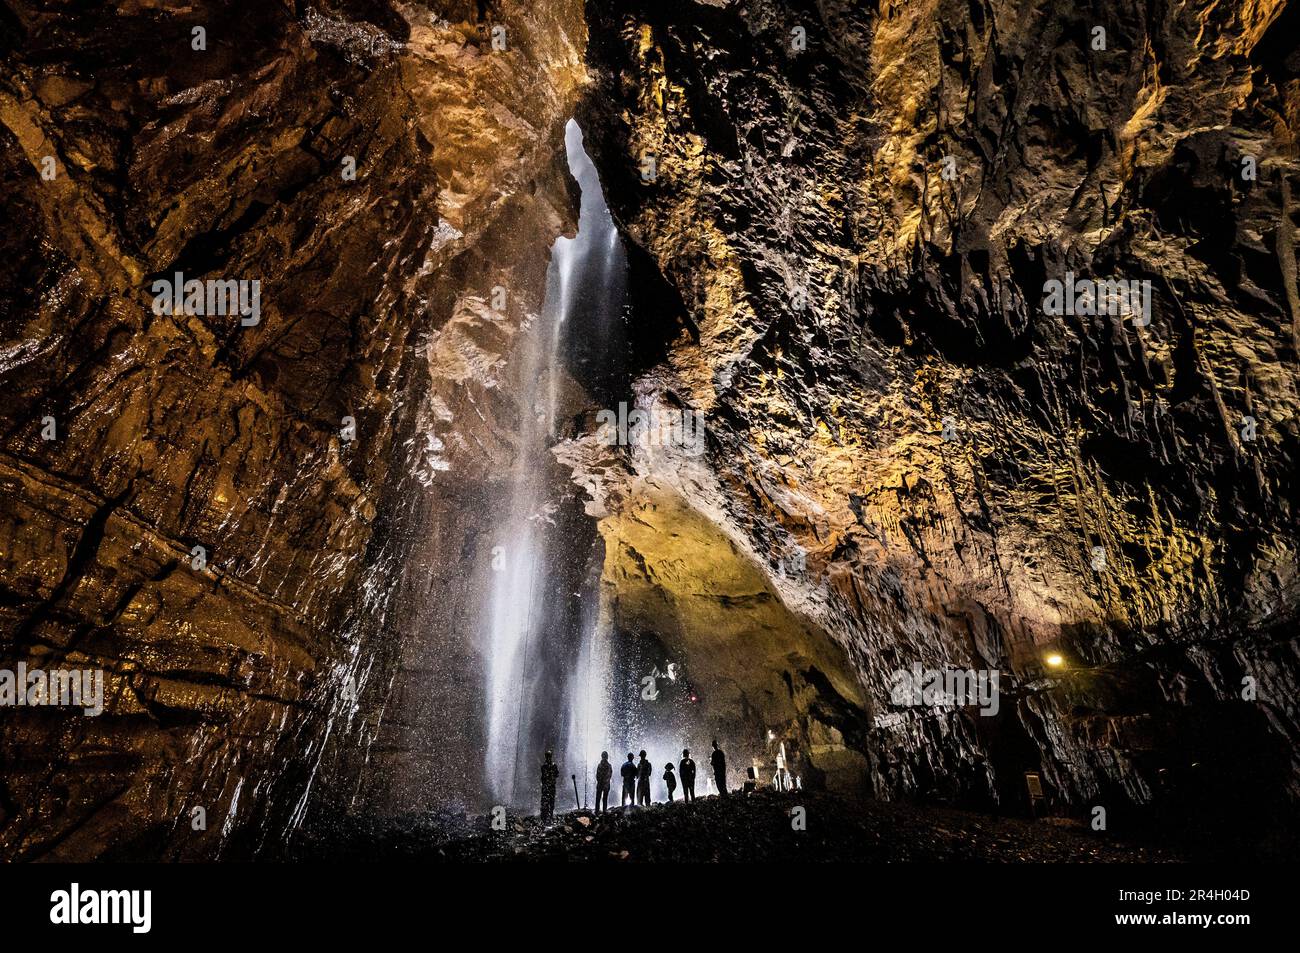 Potholers explore Gaping Gill, the largest cavern in Britain, situated in Yorkshire Dales National Park as it opens to the public this weekend. Picture date: Sunday May 28, 2023. Stock Photo